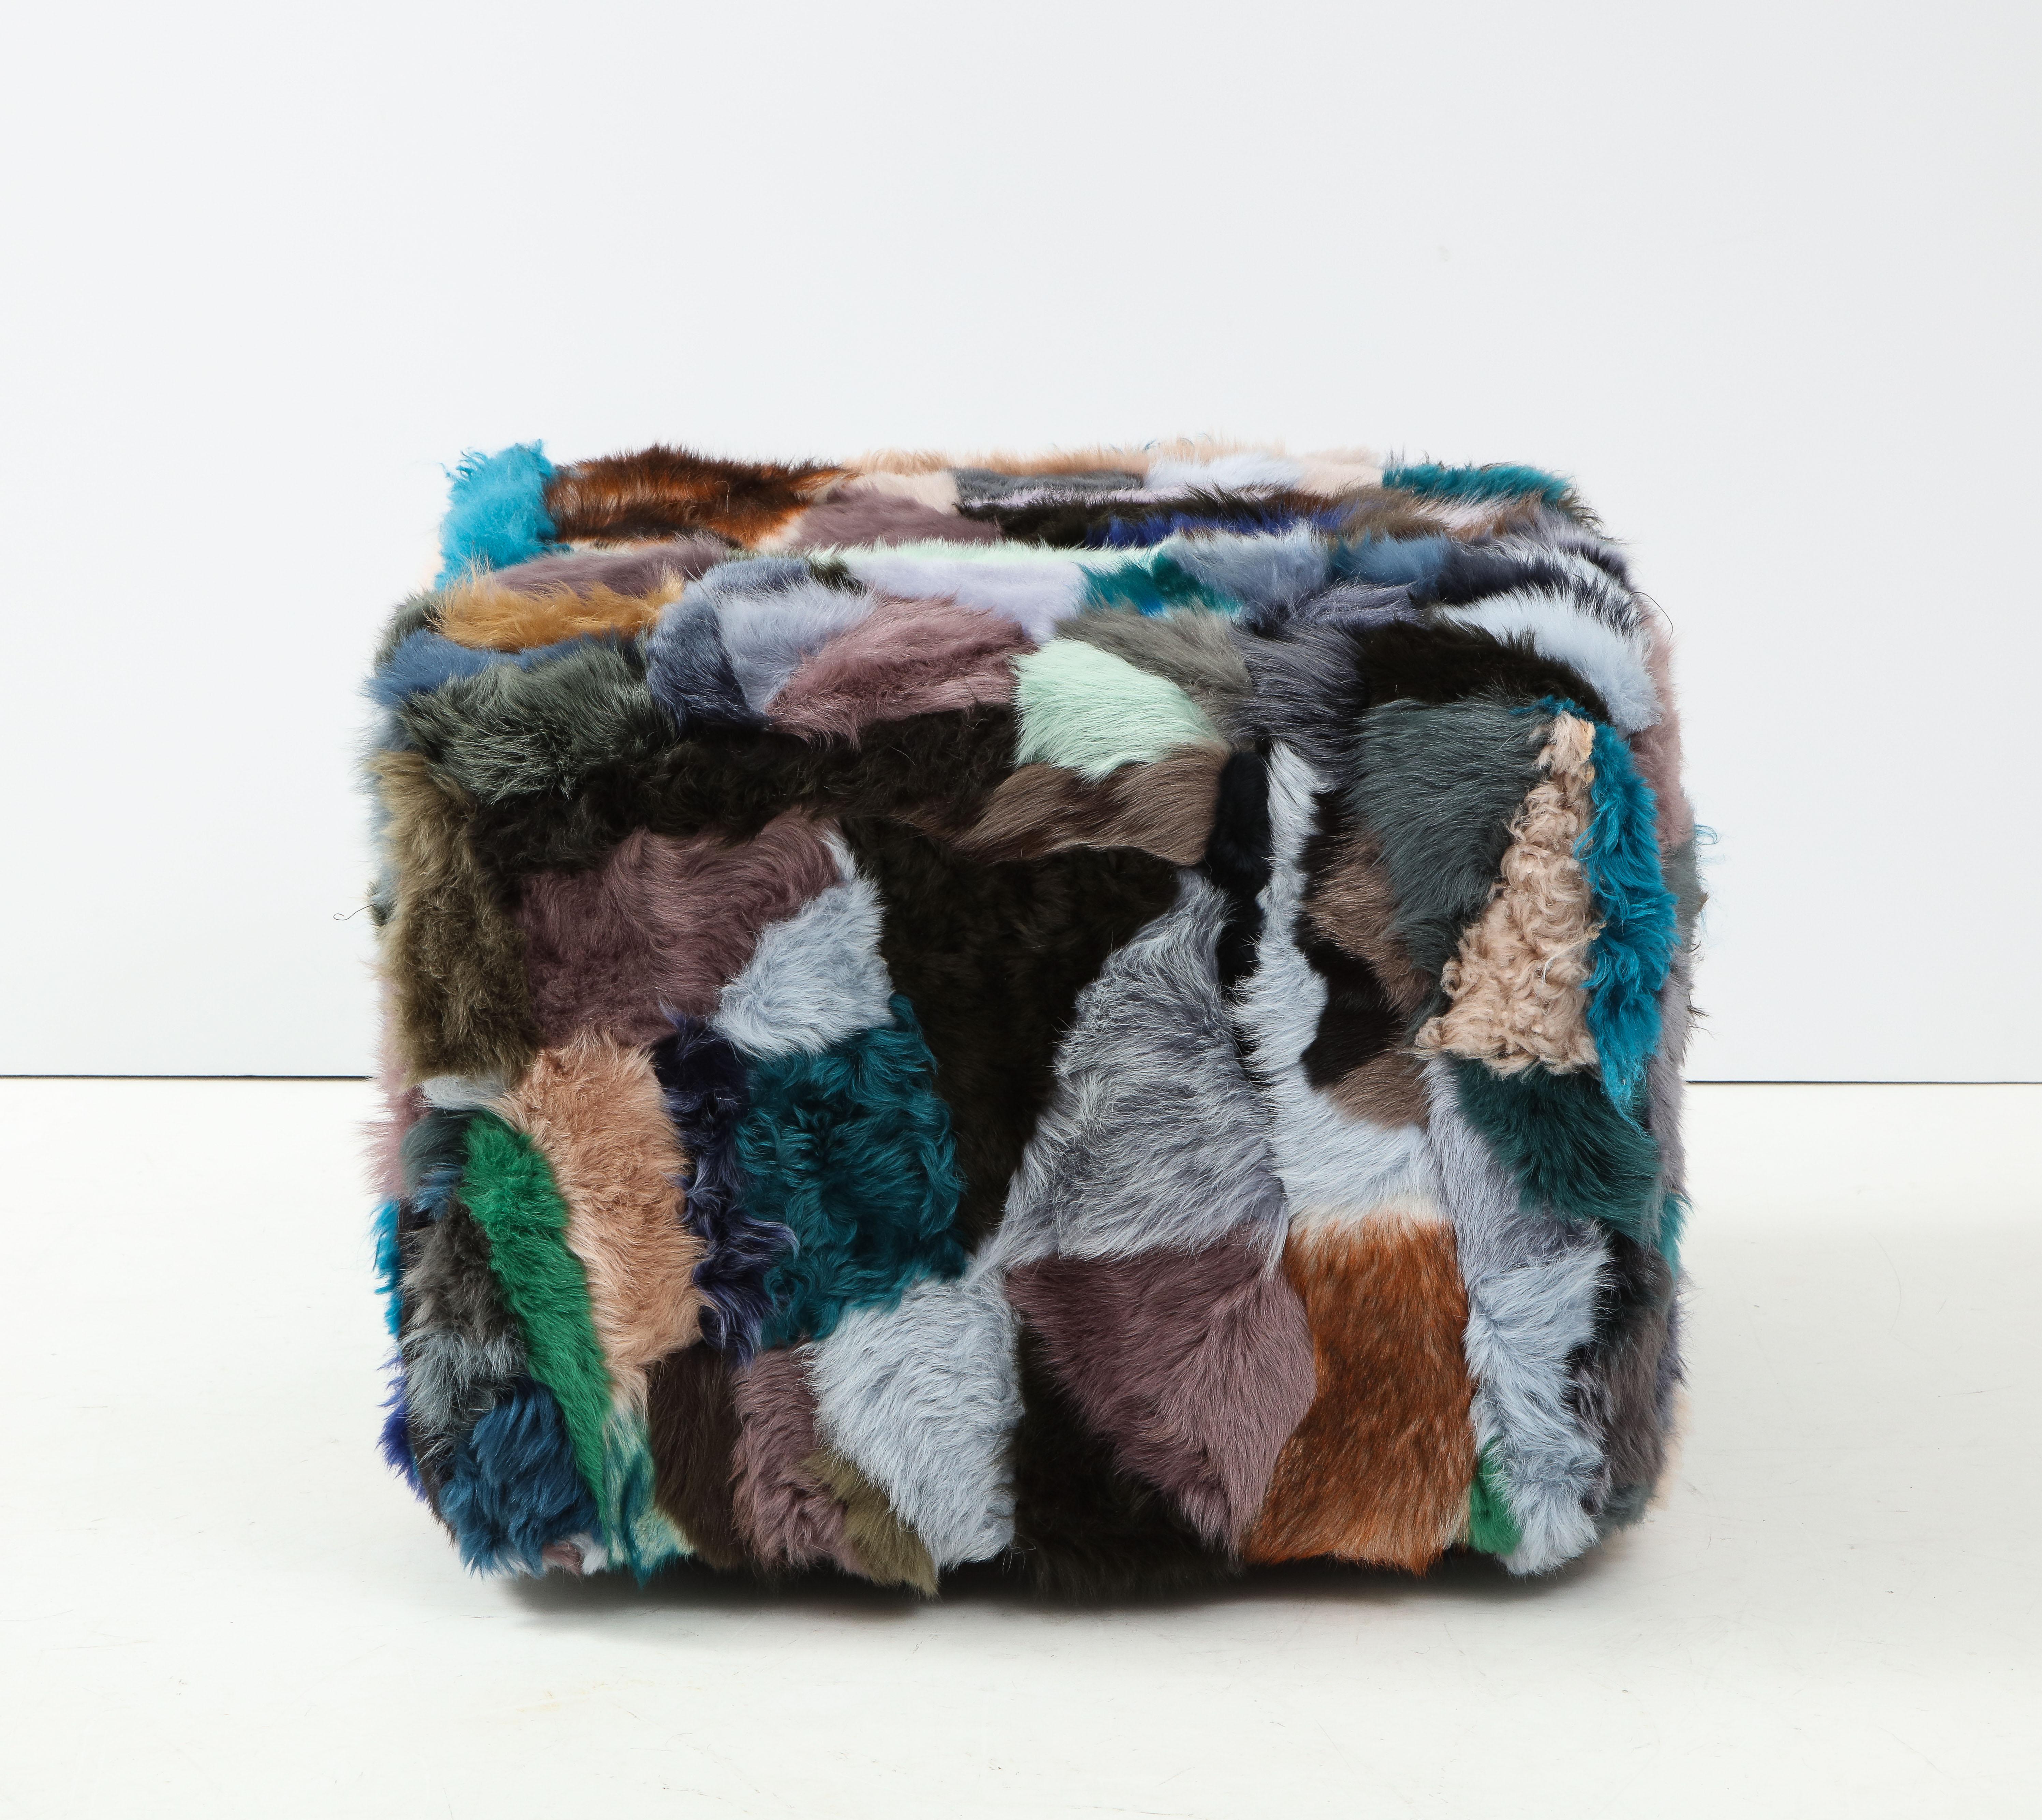 Fendi inspired cube ottoman upoholstered in patchwork Australian sheepskin in varying colors and thickness. Ottoman is on 4 tapering wood legs. A cozy seat in any setting.